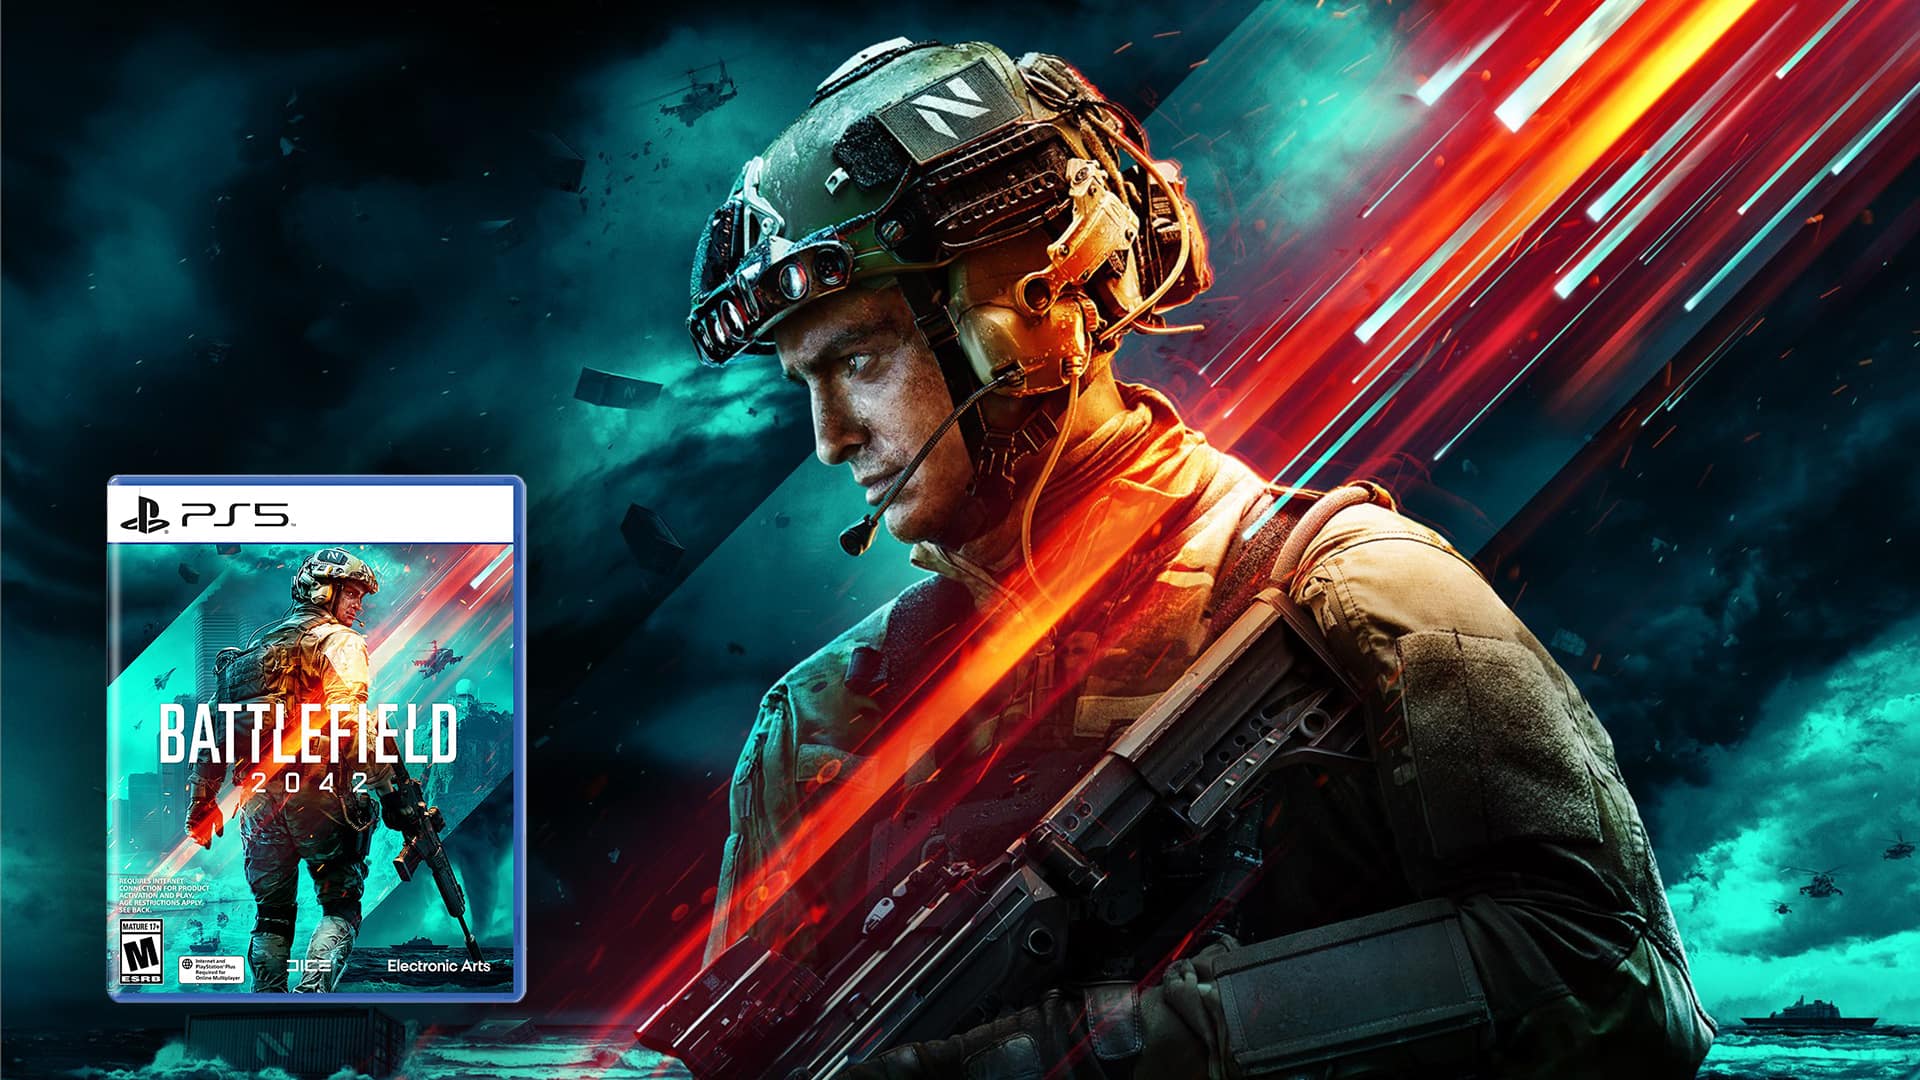 Code Battlefield Promo 2042 This Save Pre-Order $10 Guide: With